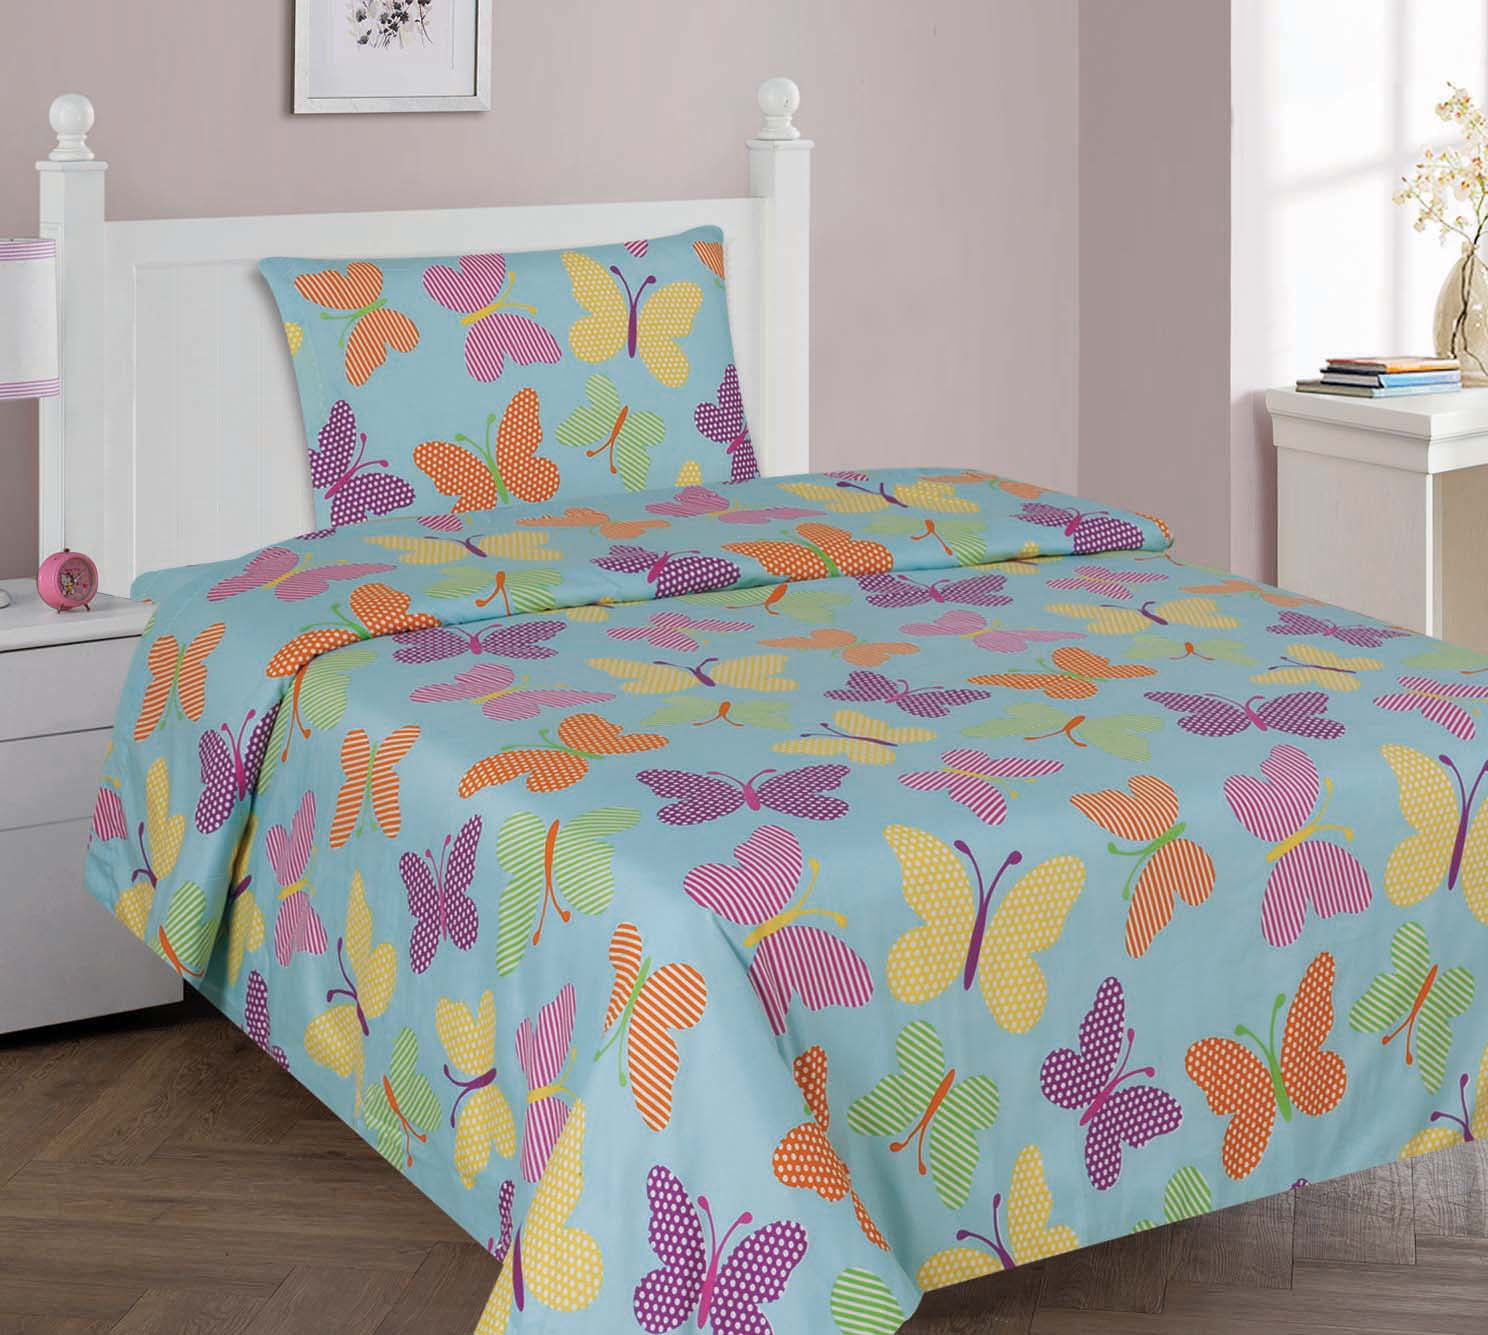 Childrens double bed covers